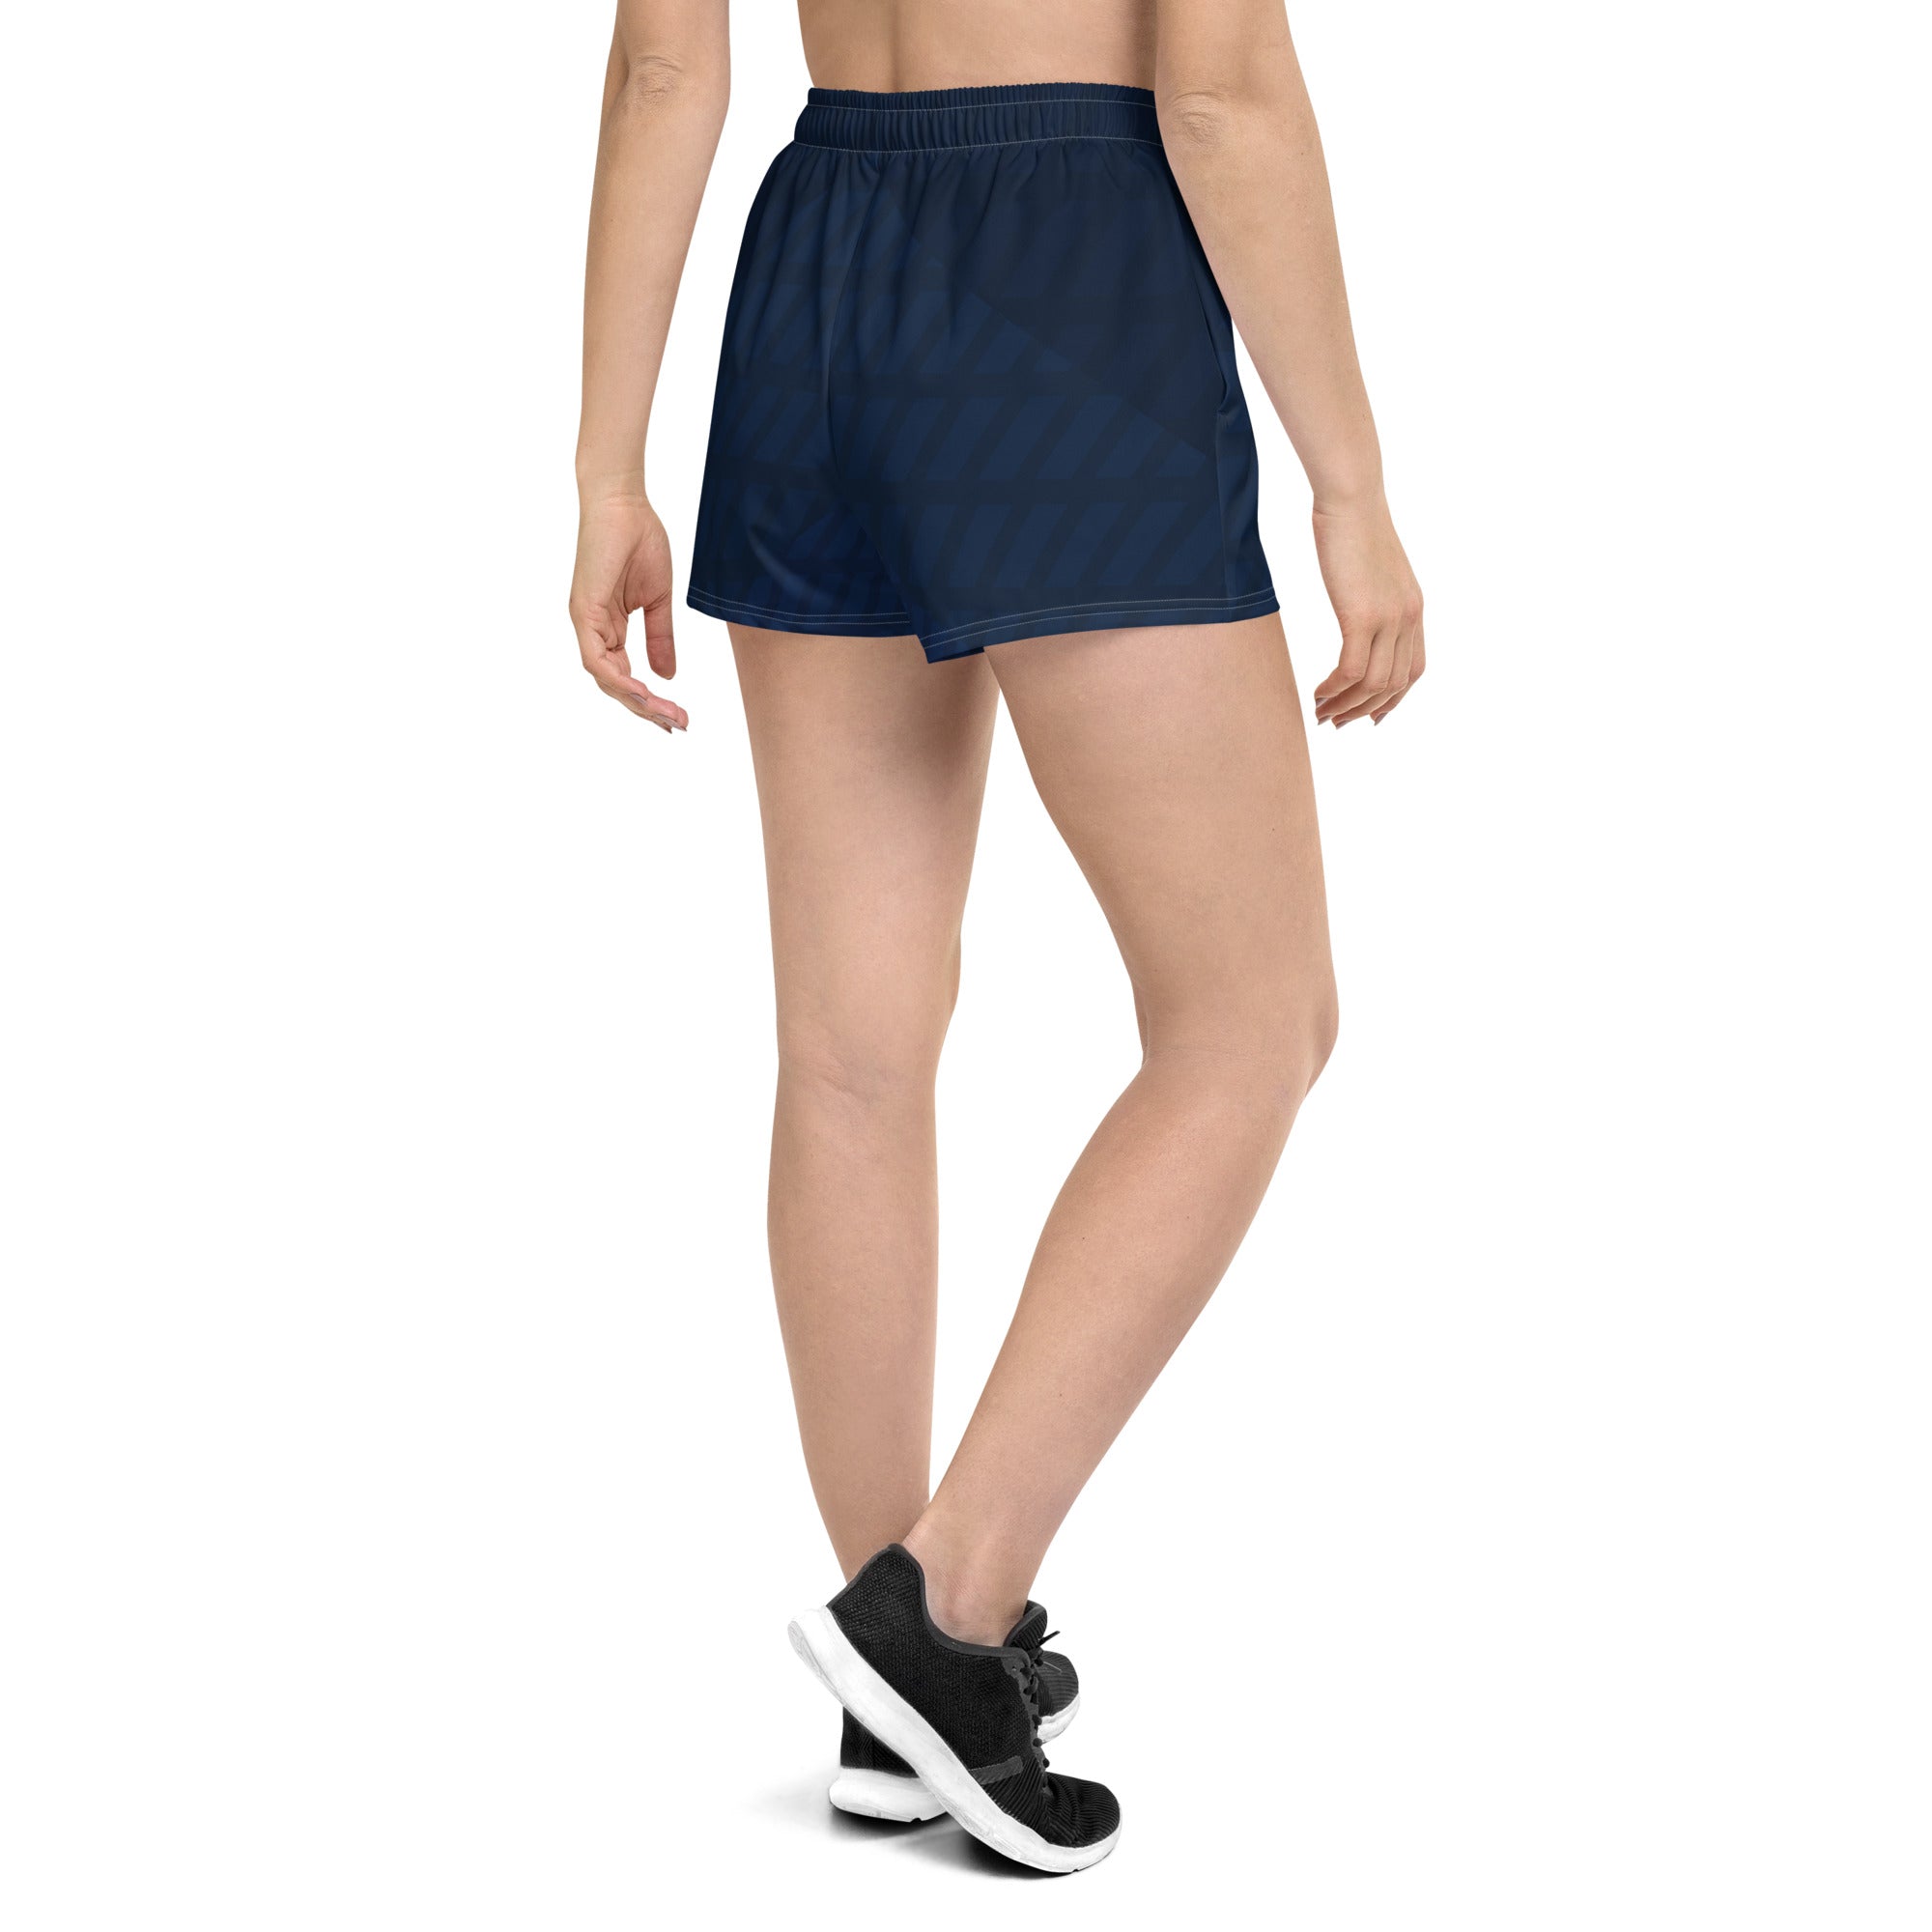 Tampa Warriors Word Seal Women’s Athletic Shorts